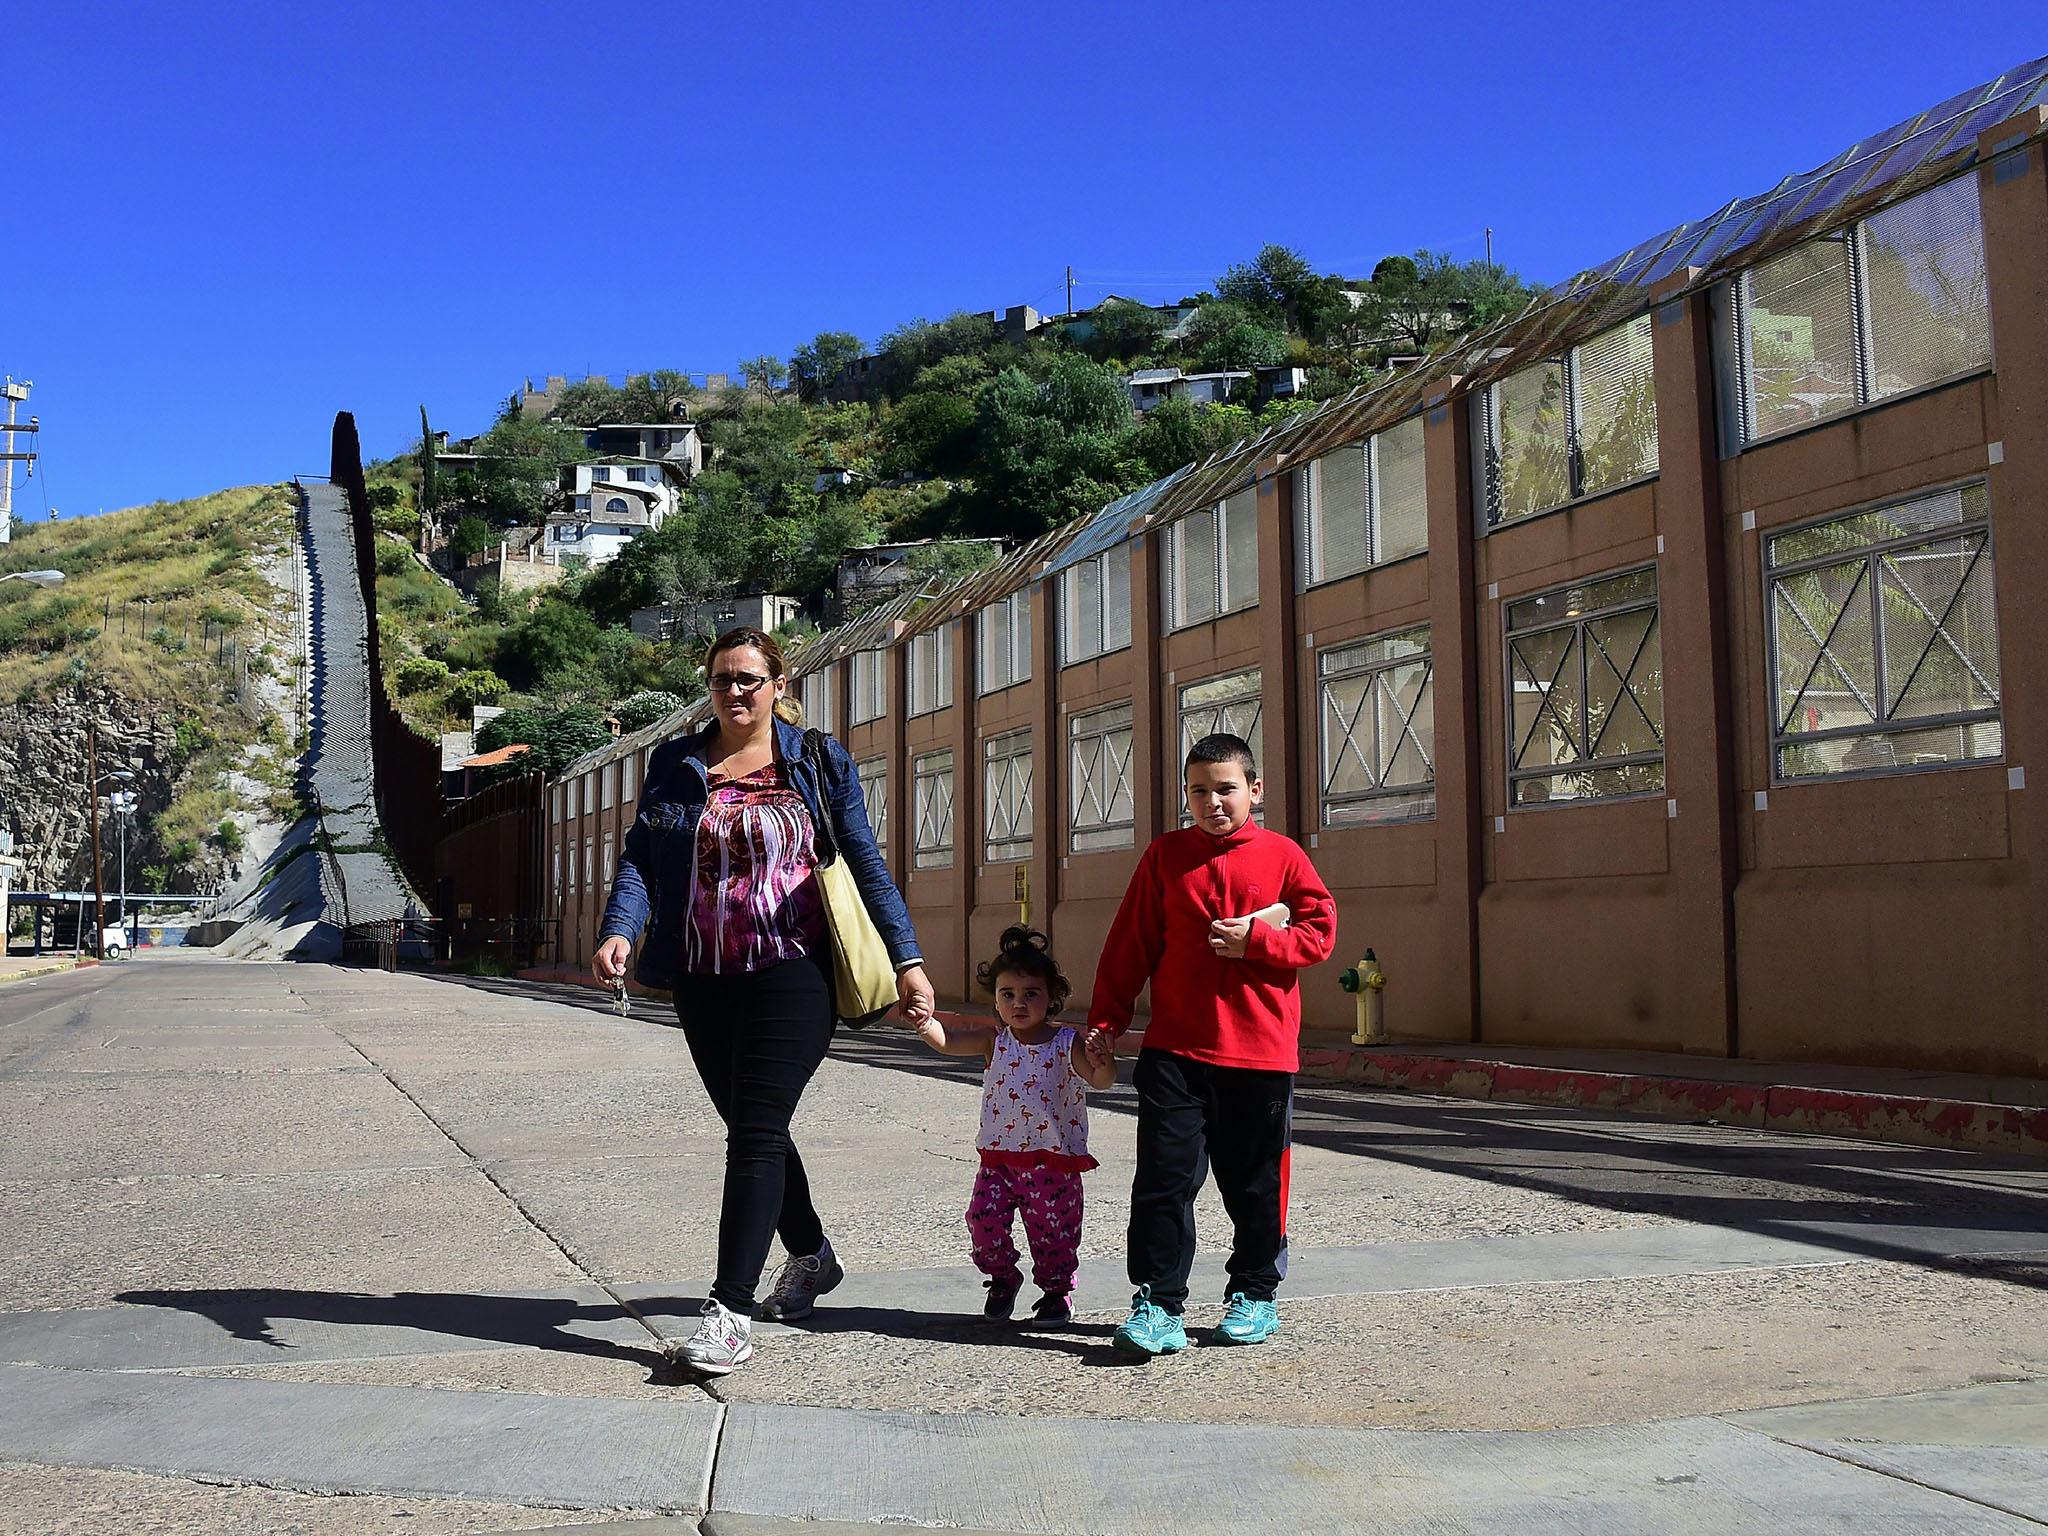 A woman and two children on the Nogales side of the border in Arizona leave after speaking with people across the border wall on the Mexico side in the state of Sonora on October 11, 2016